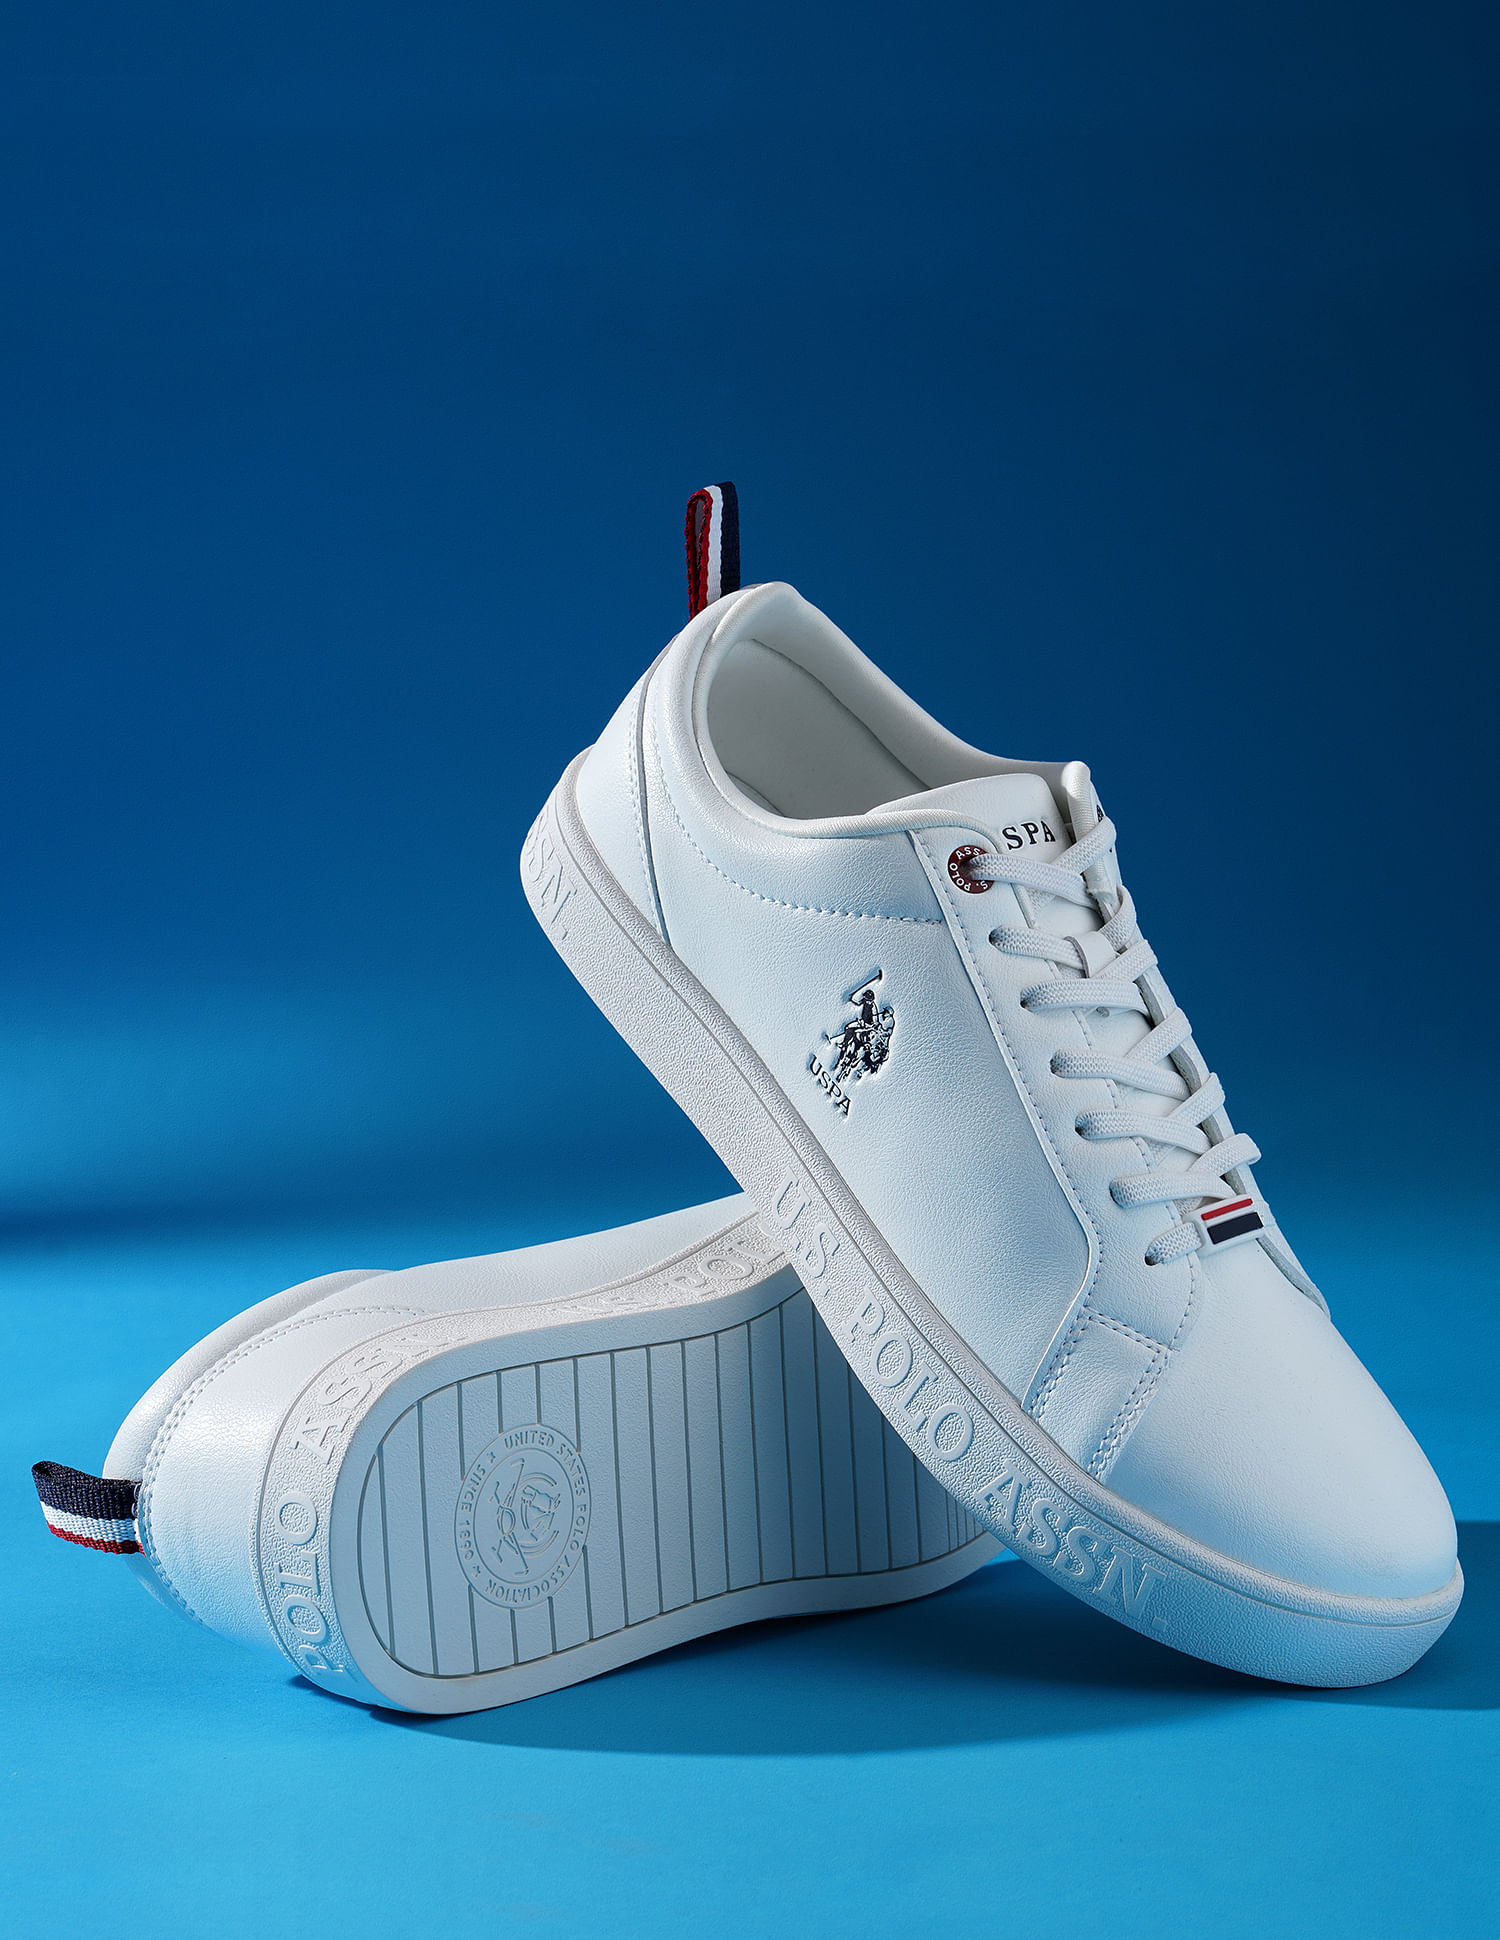 US Polo Assn Sneakers - Jonas004 - 004M2SN1-BLT - Online shop for sneakers,  shoes and boots